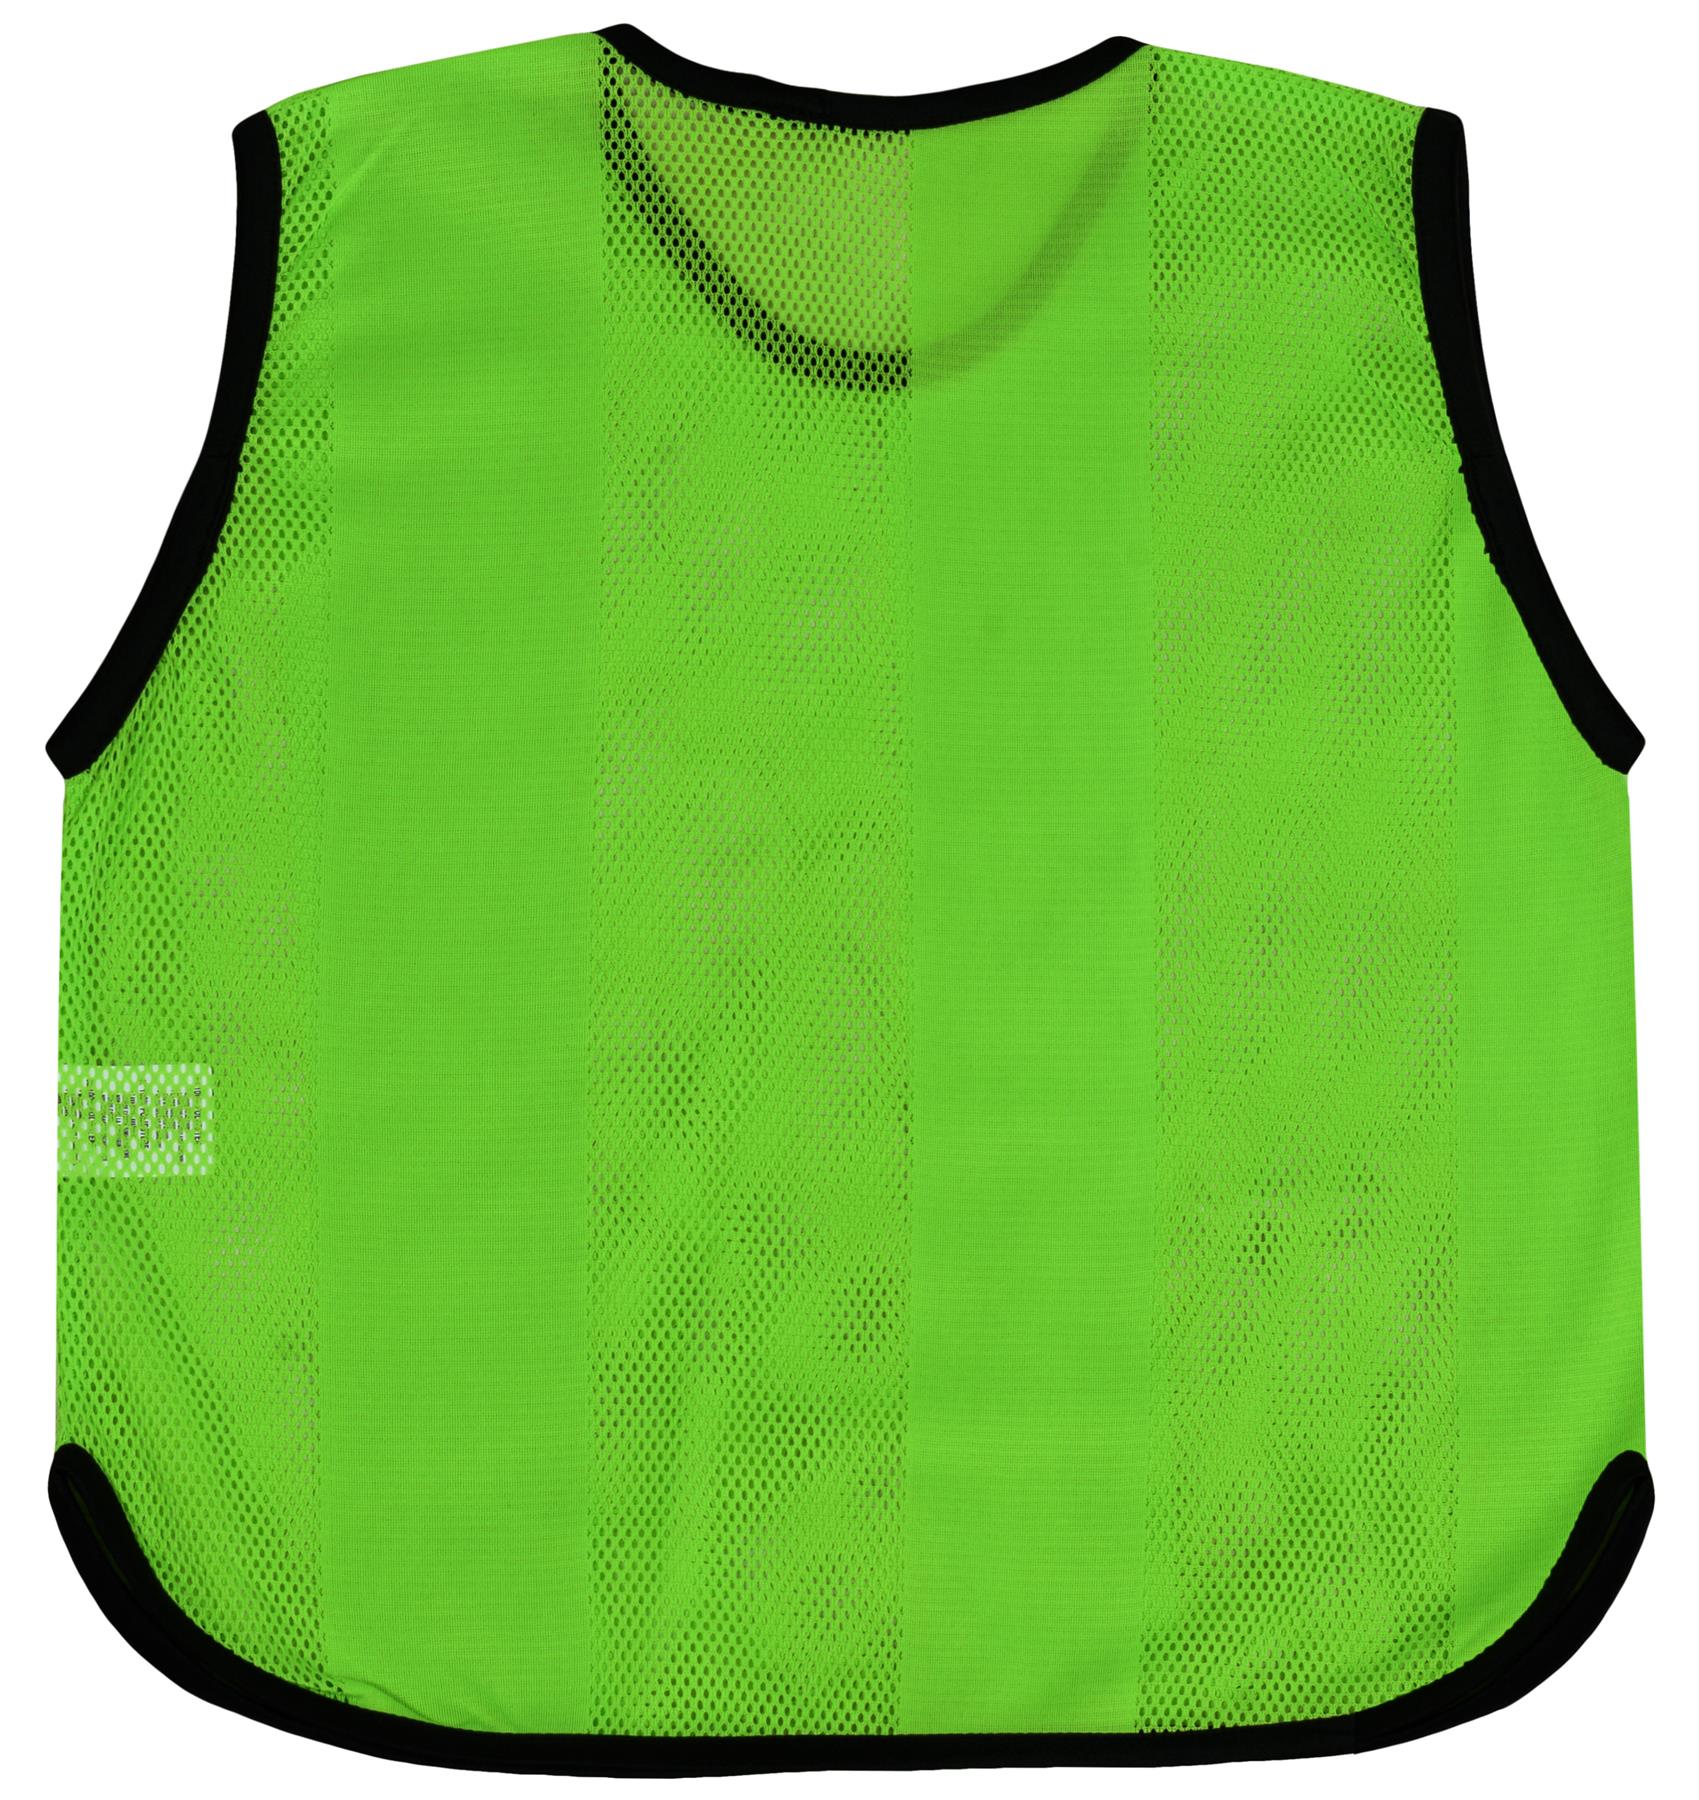 A2Z 12 Pack Sports Mesh Bibs Comfortable During Football Rugby Sports Kids/Adult